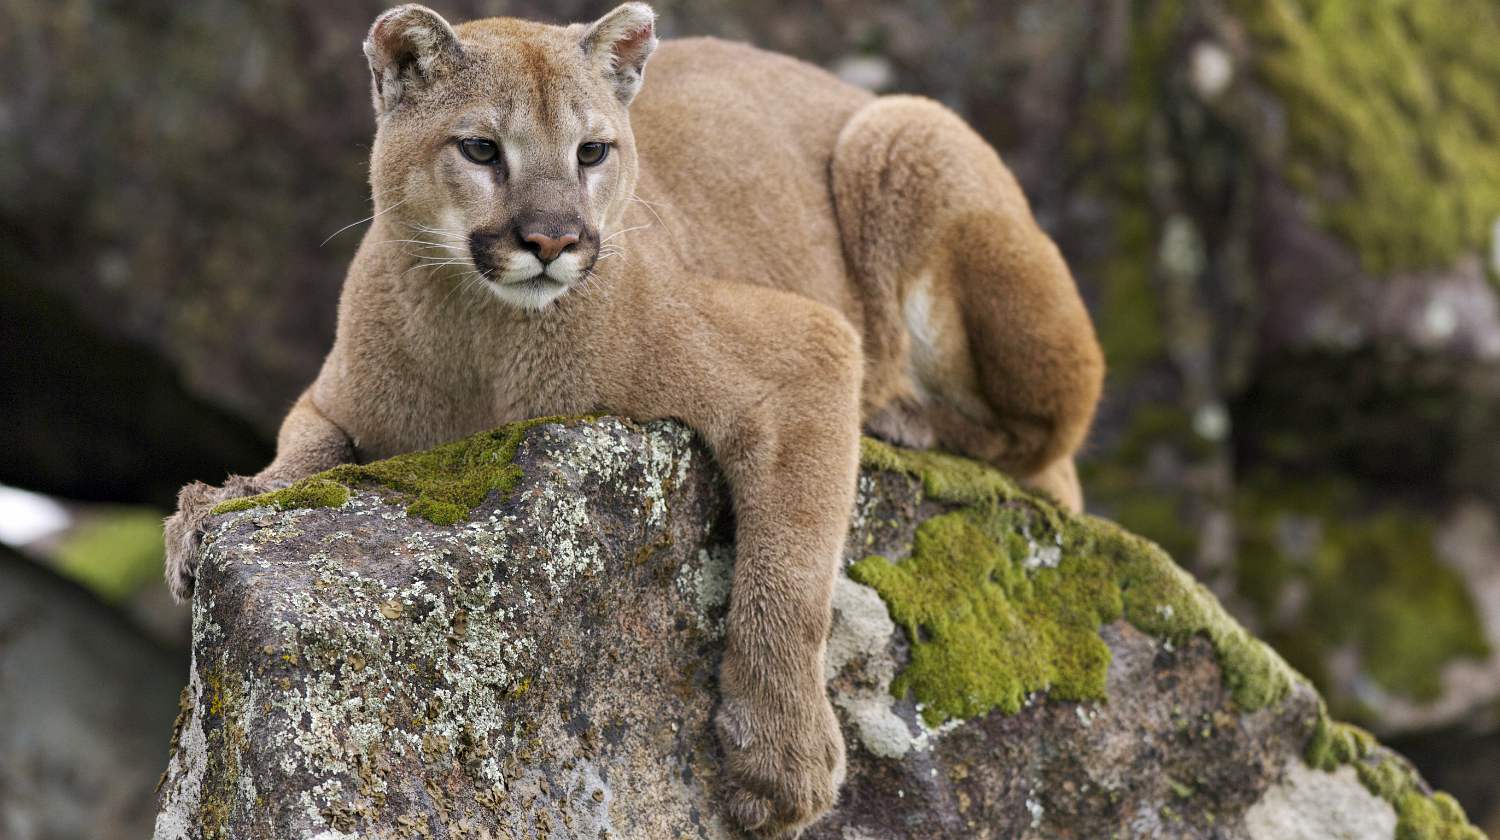 Feature | Mountain lion on moss covered rocks during spring time | Remarkable Facts About Mountain Lions